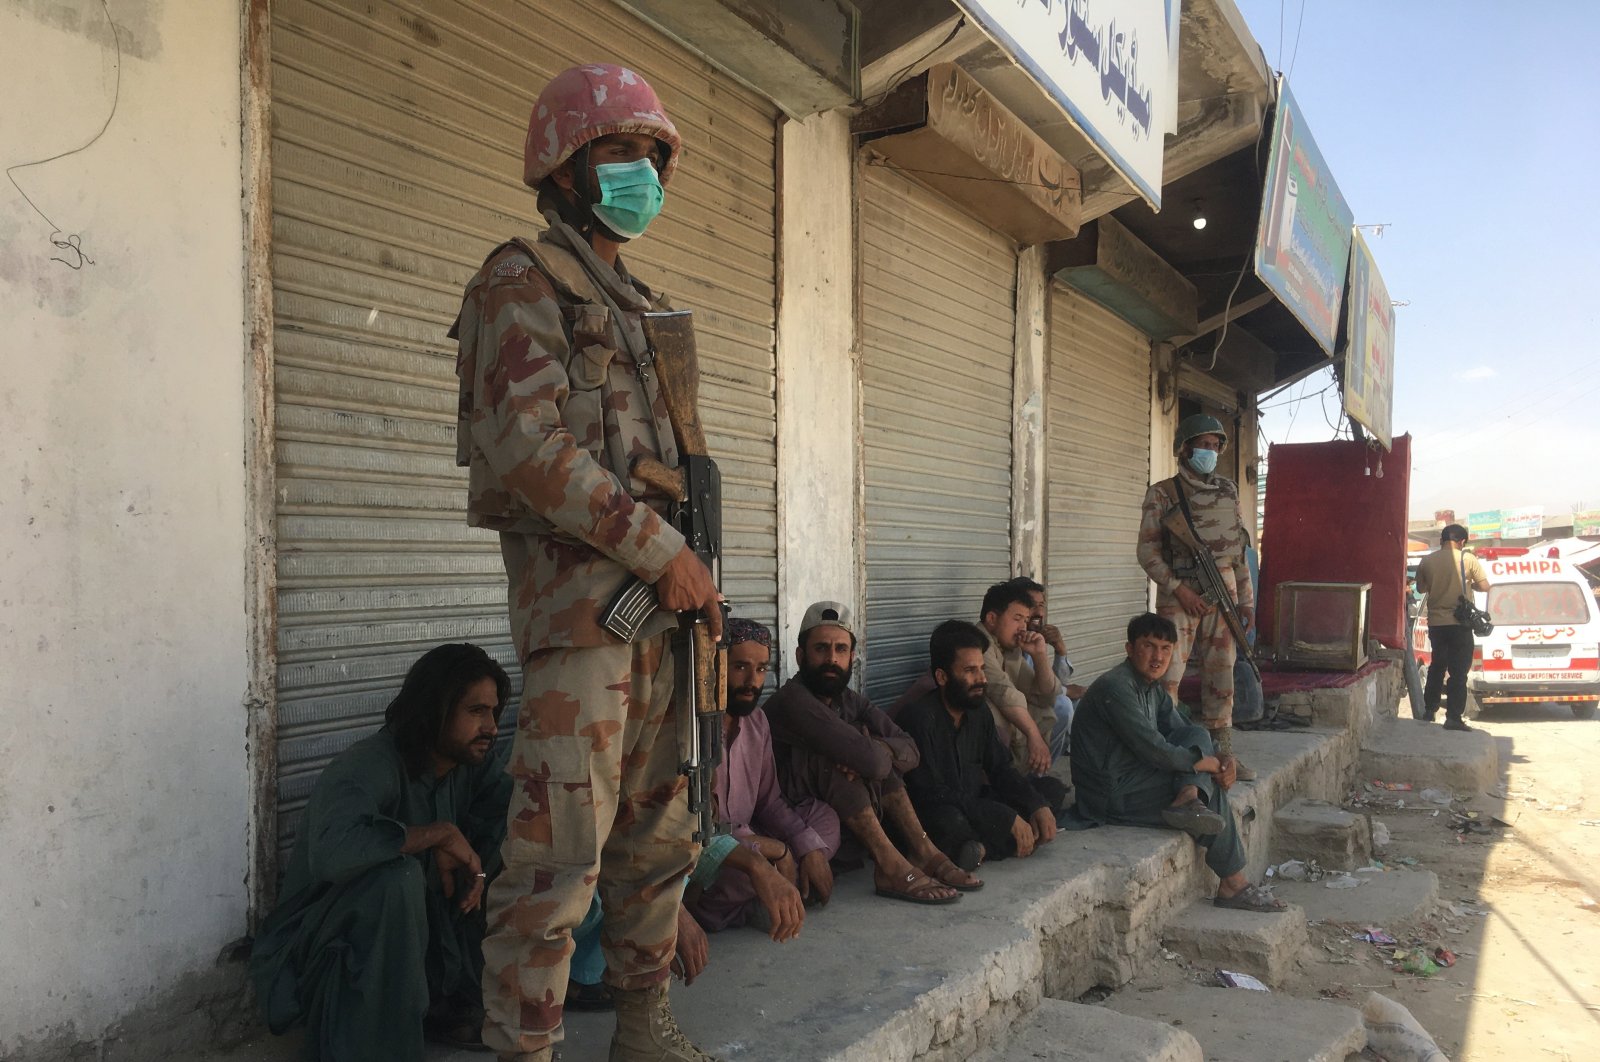 Pakistani security officials inspect the scene of a bomb blast in Quetta, the provincial capital of Balochistan province, Pakistan, May 24, 2021. (EPA Photo)